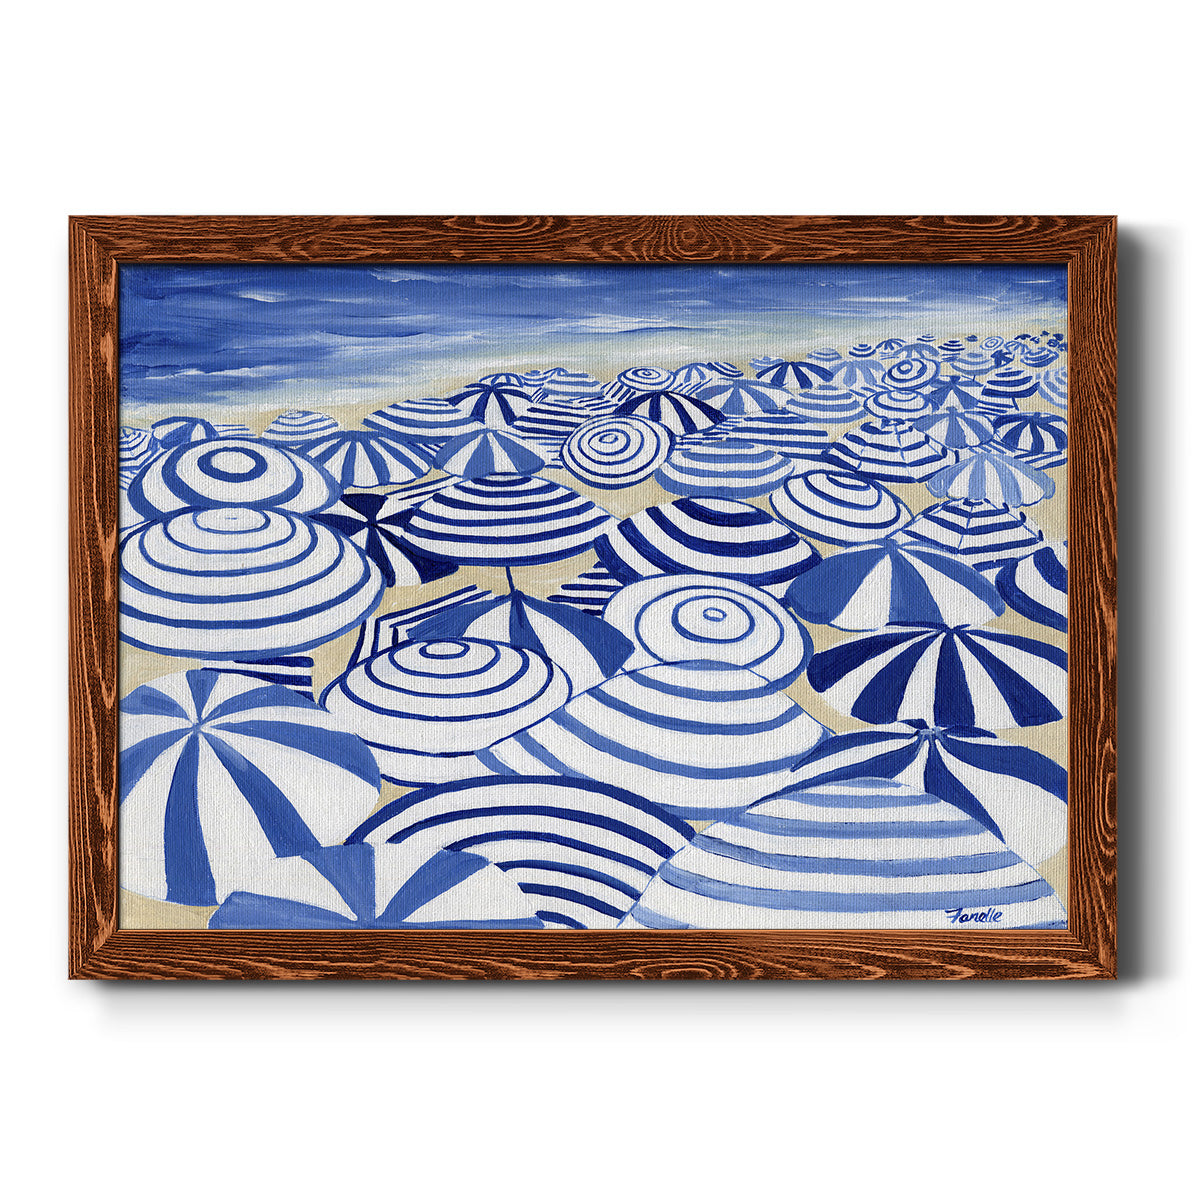 Candy Bowl Prussian Blue-Premium Framed Canvas - Ready to Hang